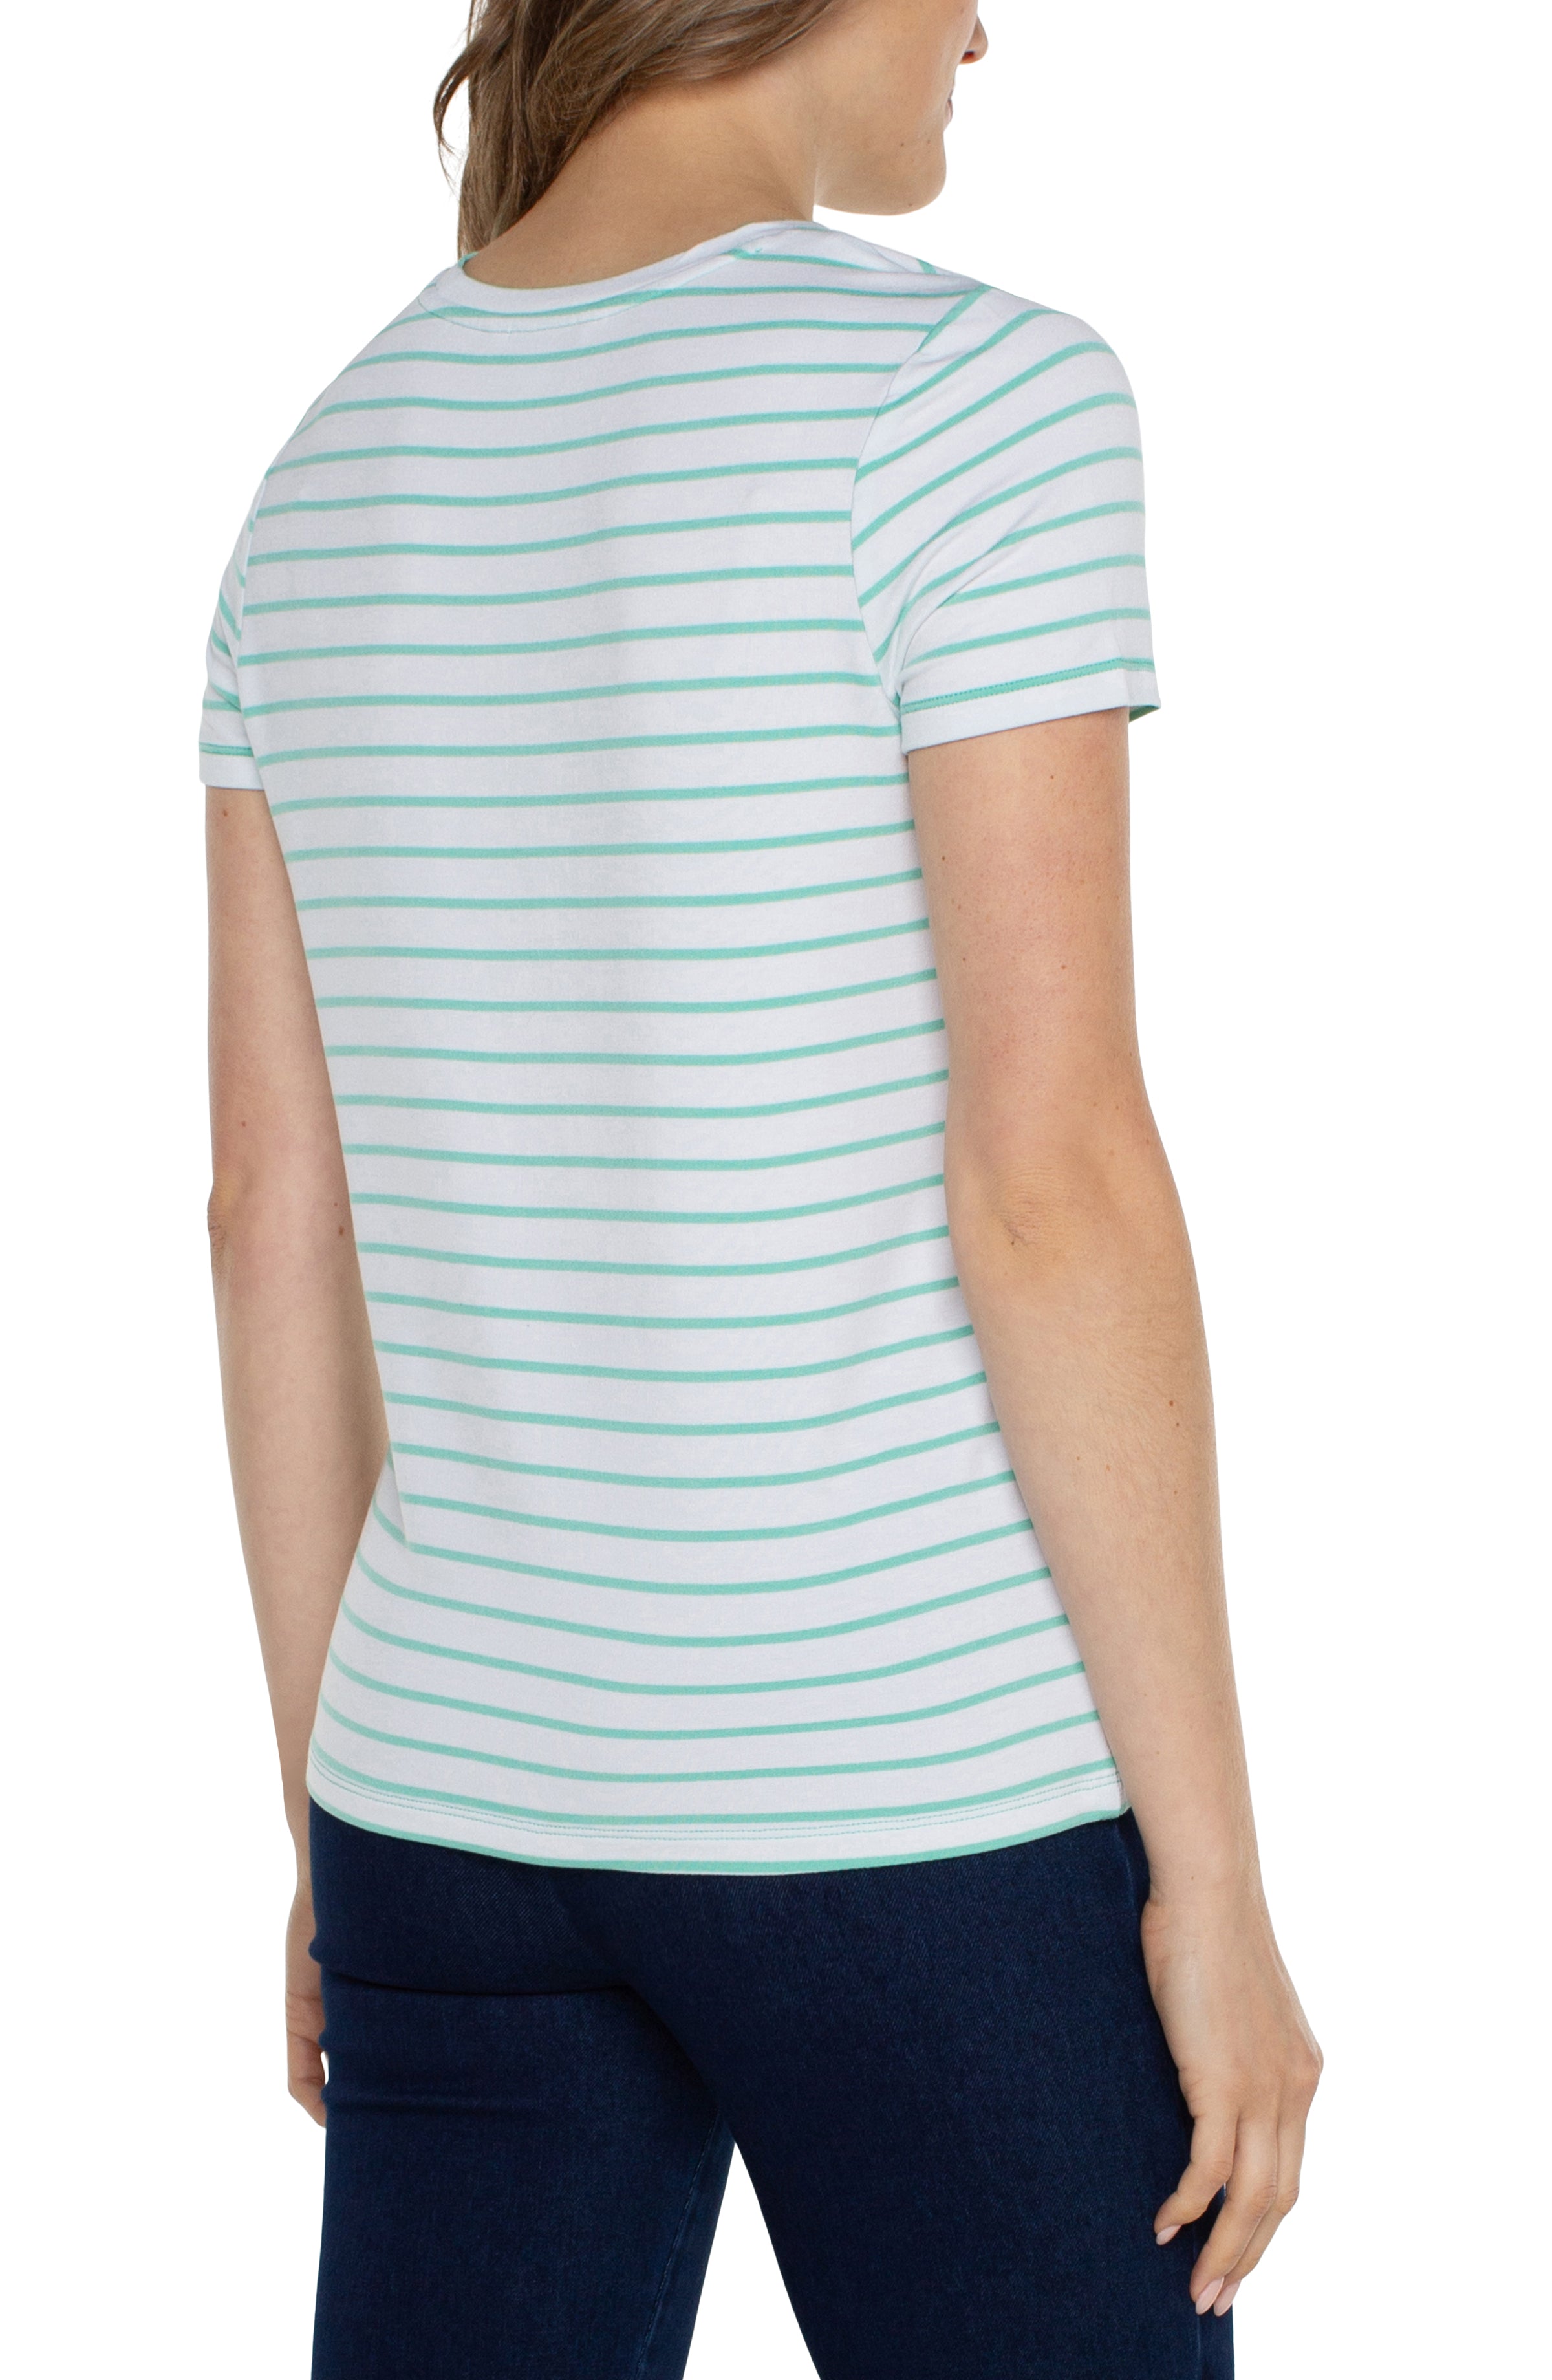 LVP Classic Crew short sleeve - white with mint stripe back view